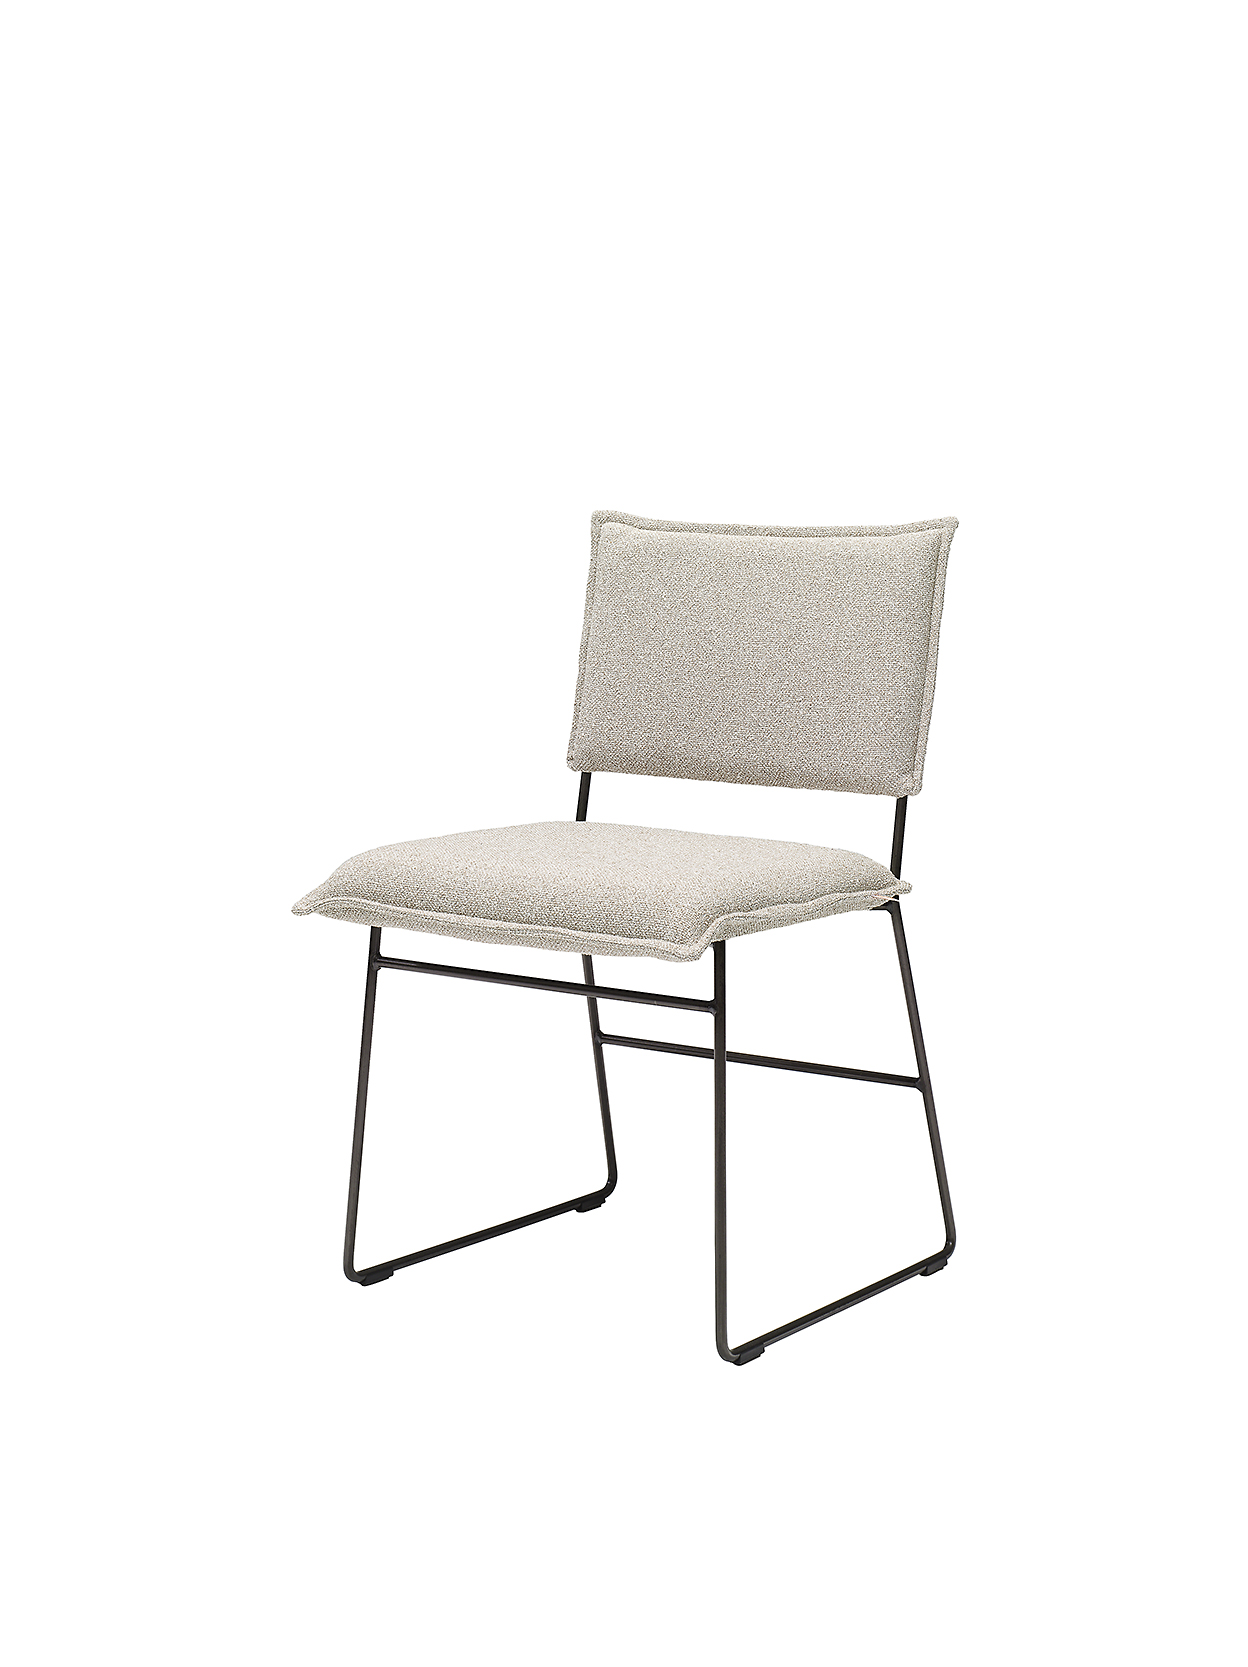 Norman Chair Without Arm Trier Sand Pers LR ZS 8720153744539